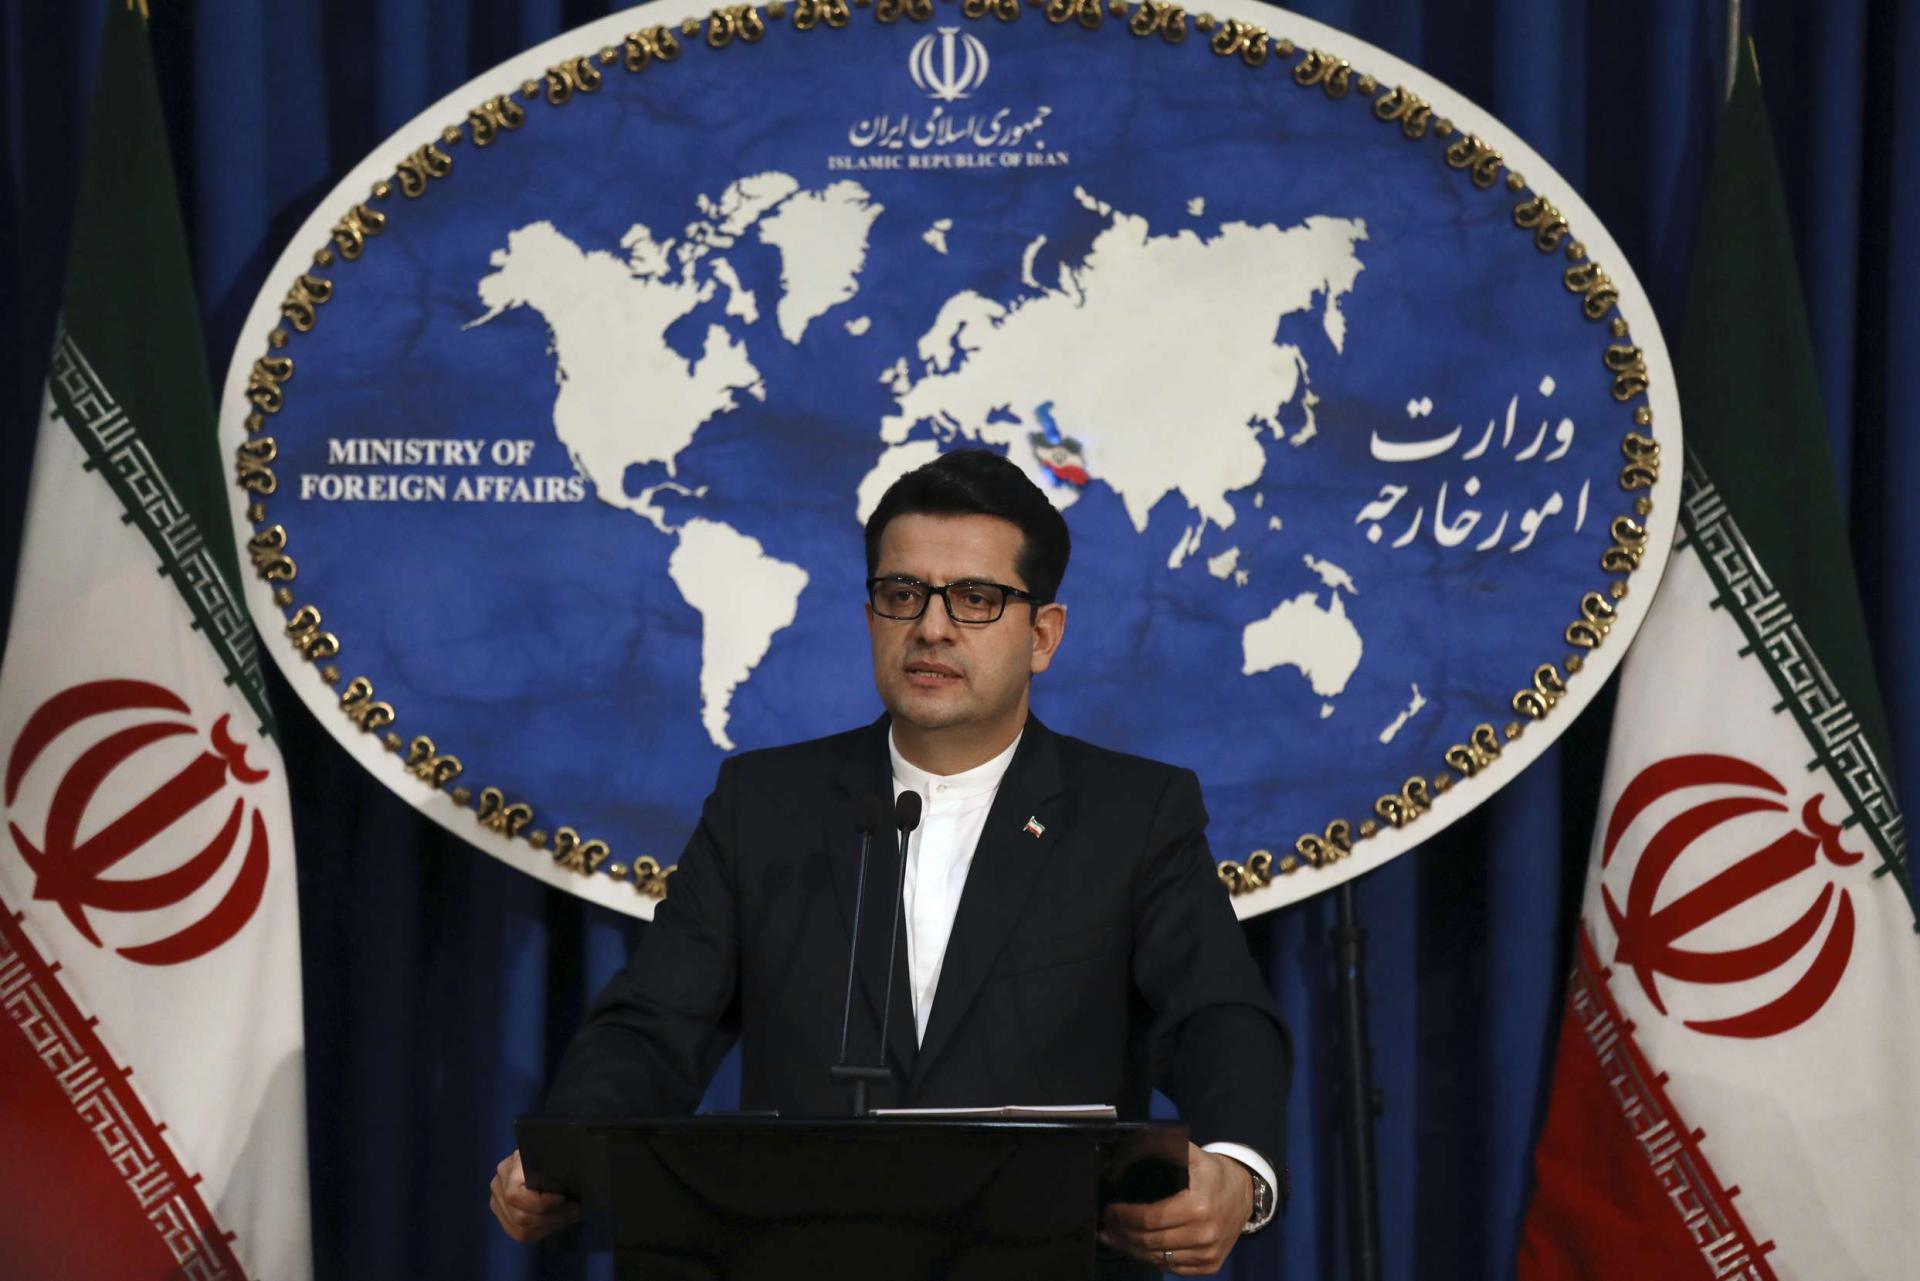 Iran's Foreign Ministry spokesman Abbas Mousavi speaks at a media conference in Tehran